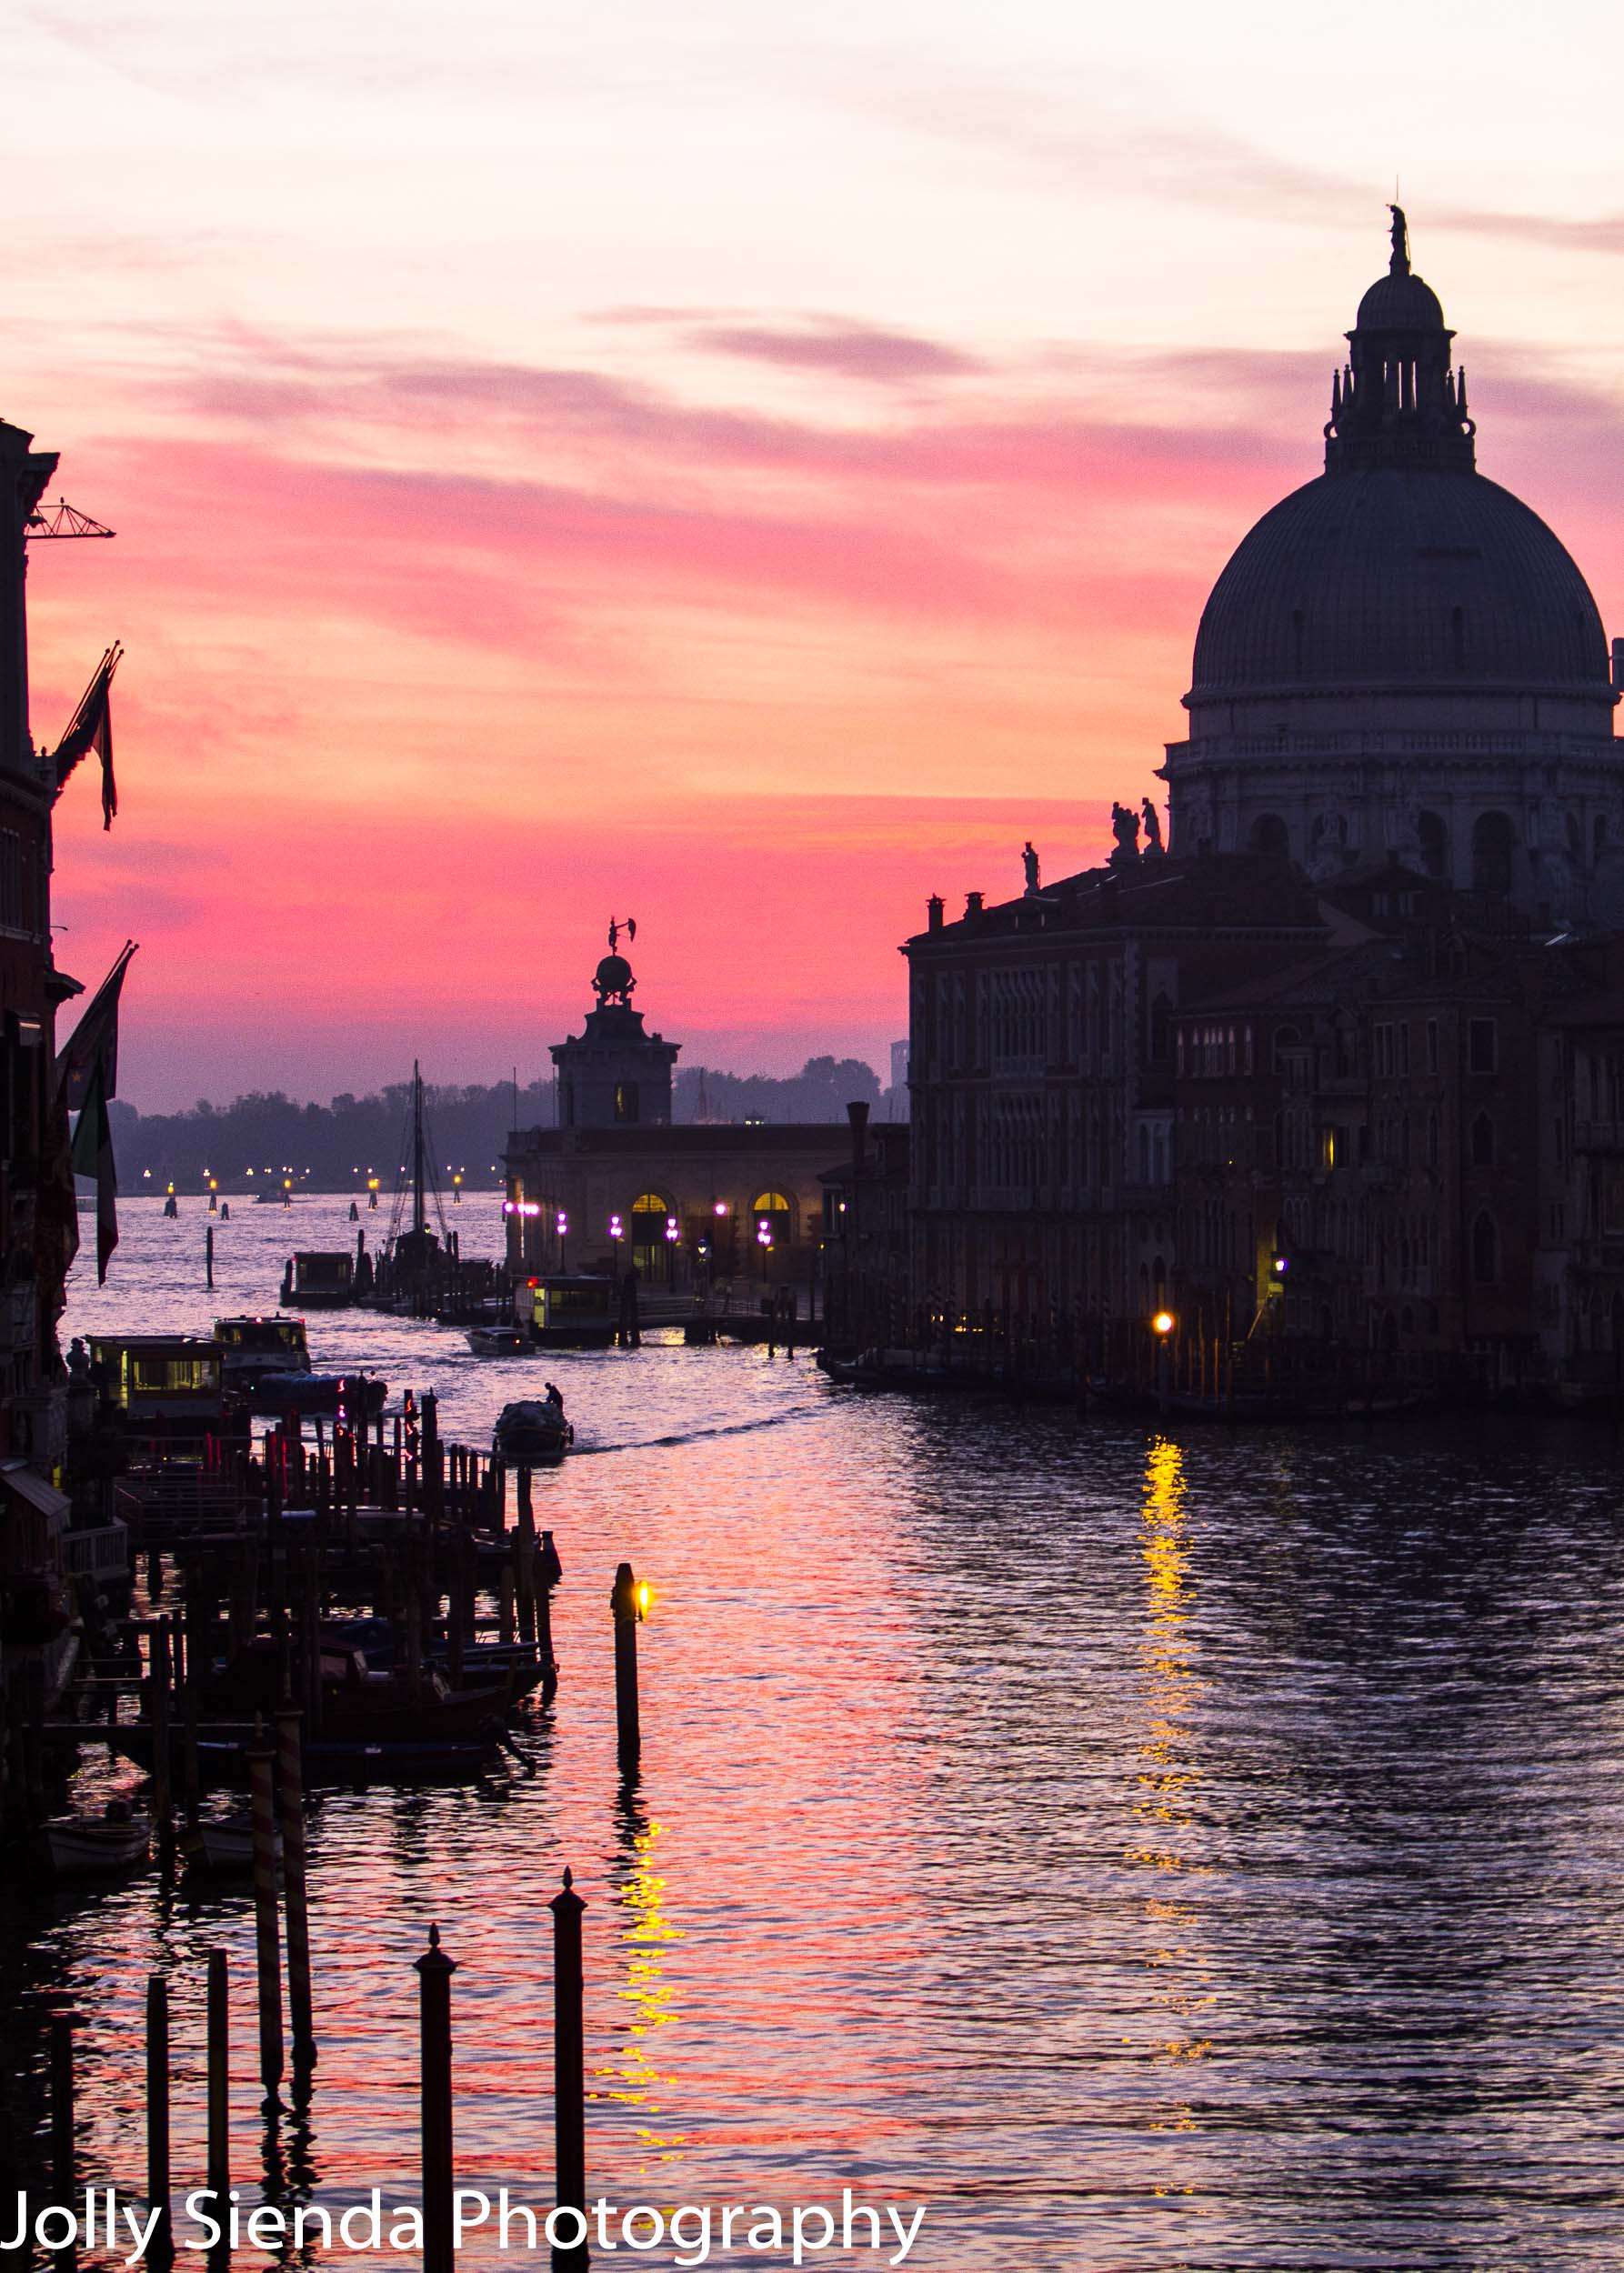 Pink and yellow sunrise over Santa Maria della salute and the Gr